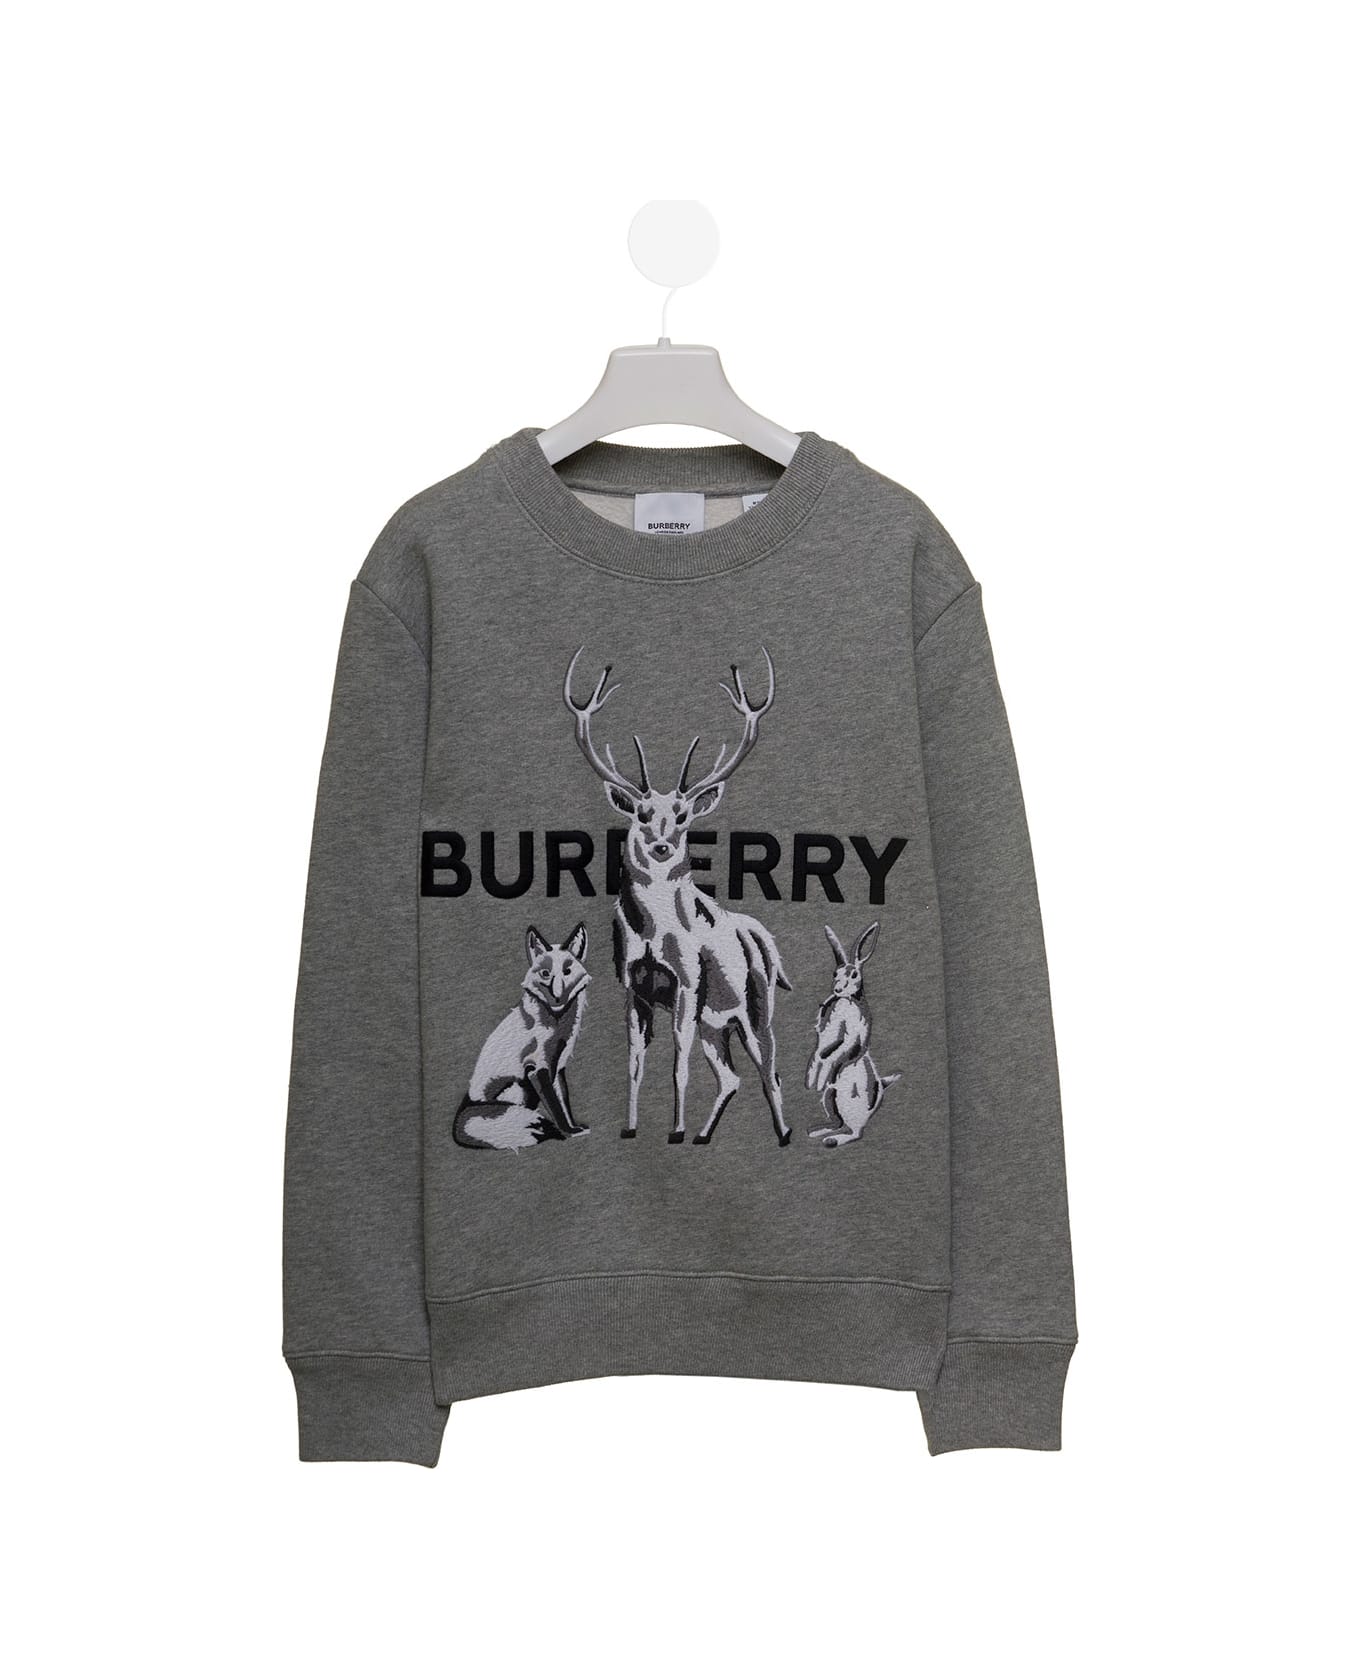 Burberry Kids Baby Boy's Grey Embroidered Sweater - Grey